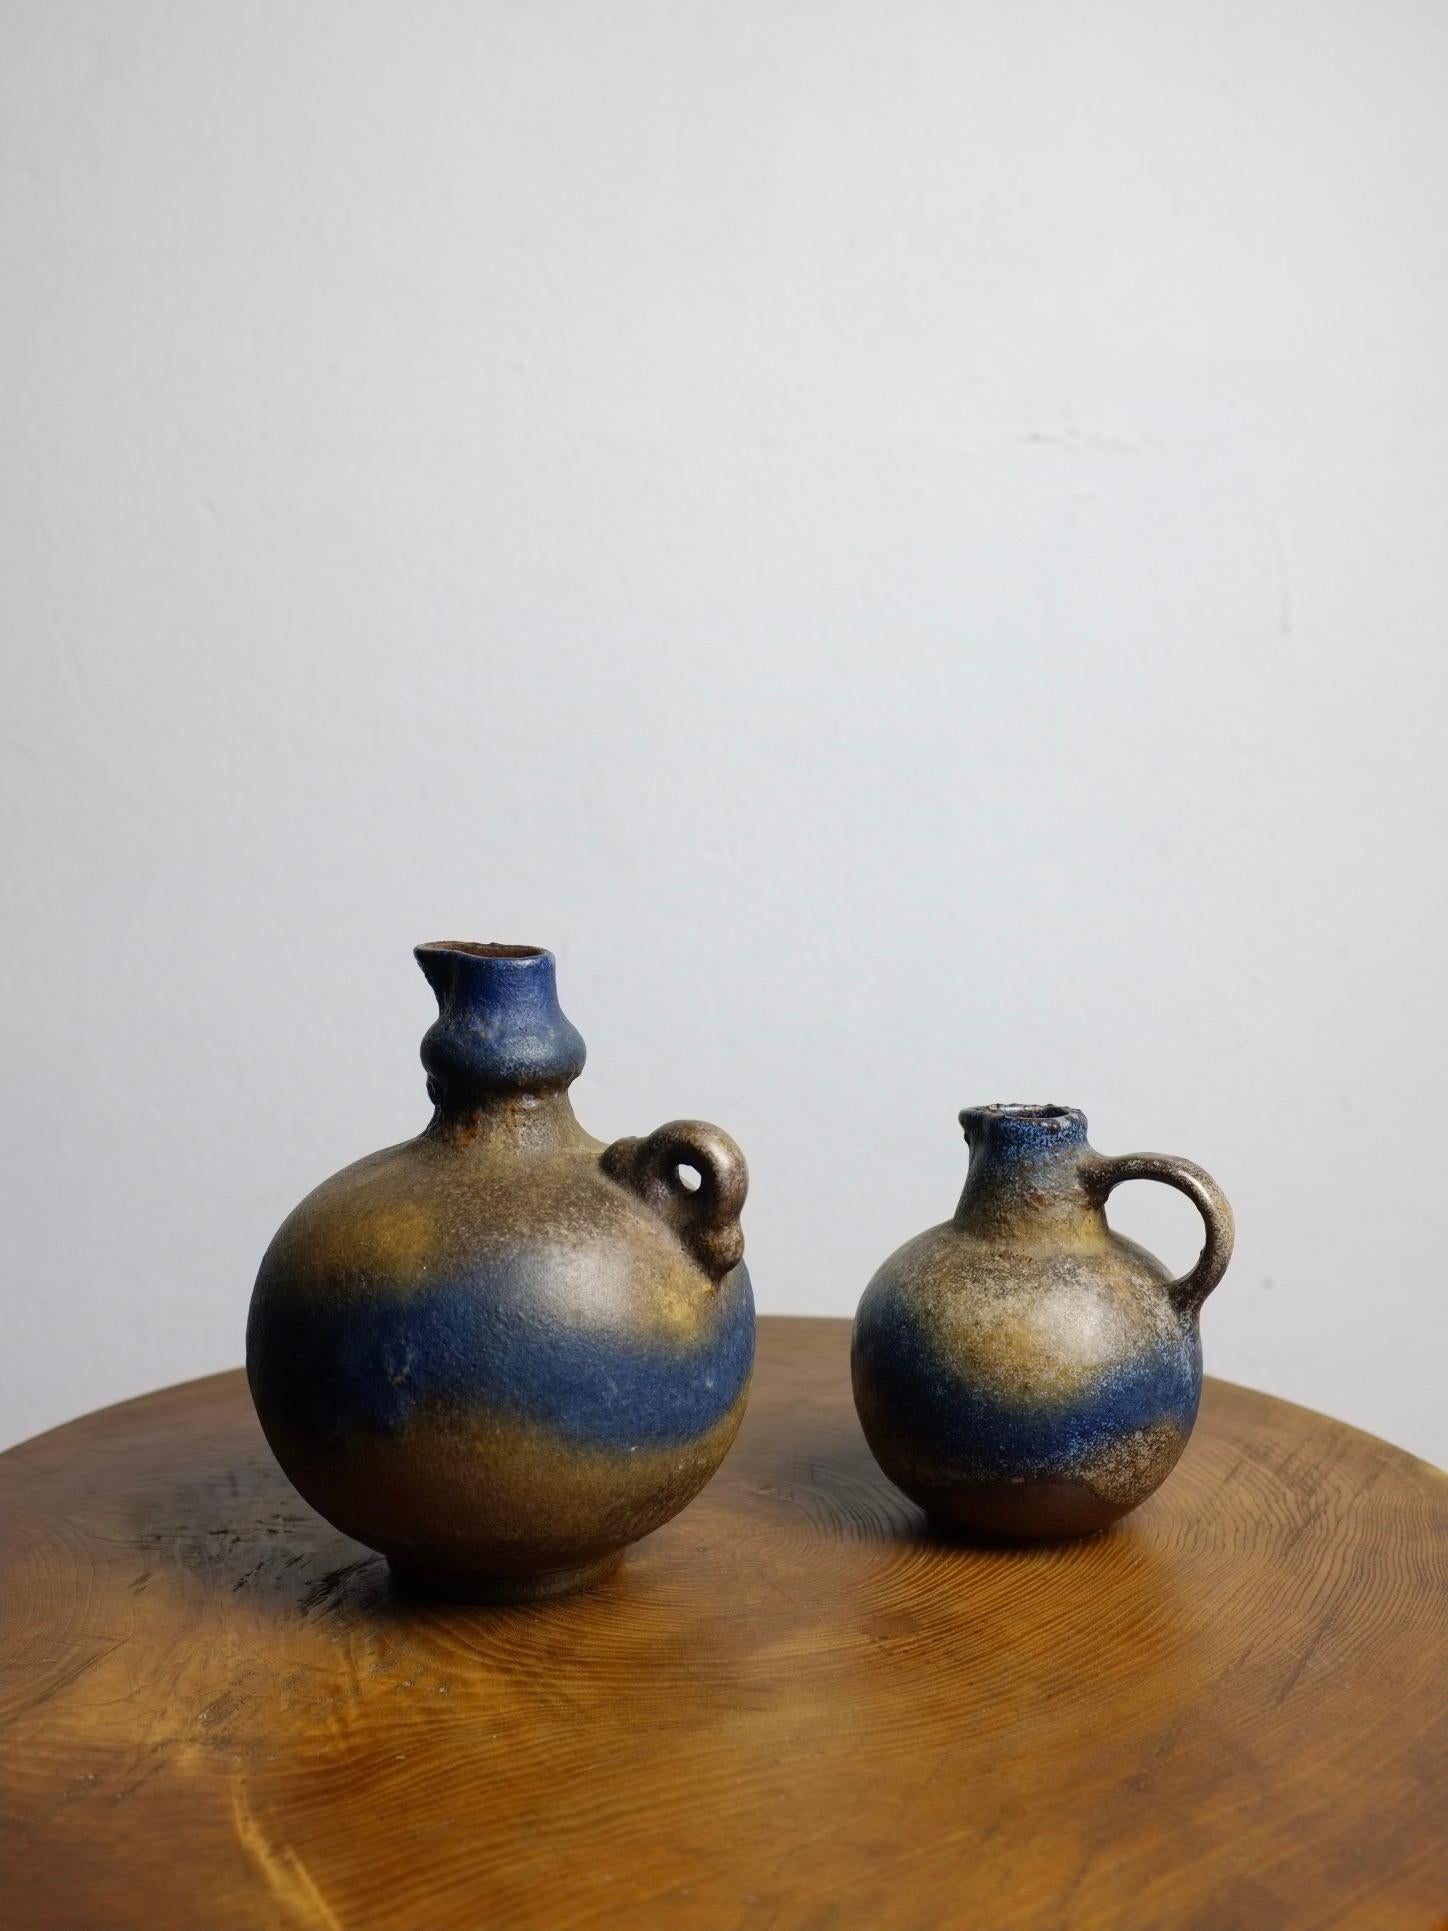 Set of 2 vintage jug vases from Ruscha. Numbered - 304, 308. Beautiful blue-brown glaze.

Additional information:
Country of manufacture: West Germany
Design/Manufacture period: 1960s
Dimensions: Large:  Ø 12 x 16 H cm 
Small: Ø 9 x 11.5 H